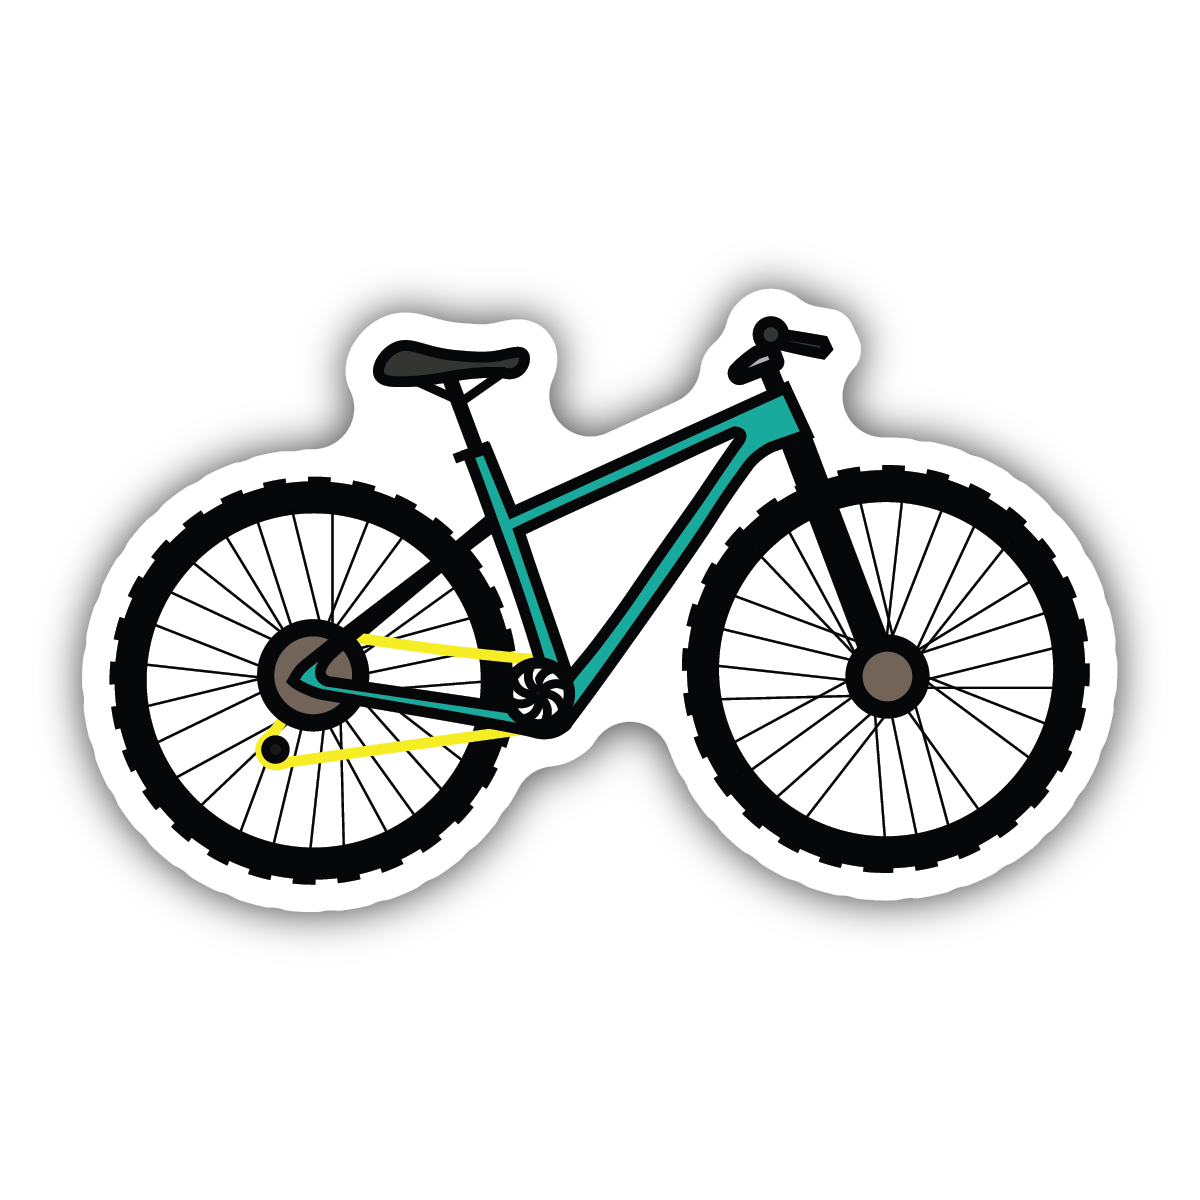 sticker on white background. sticker has graphic of teal bicycle with chunky wheels.